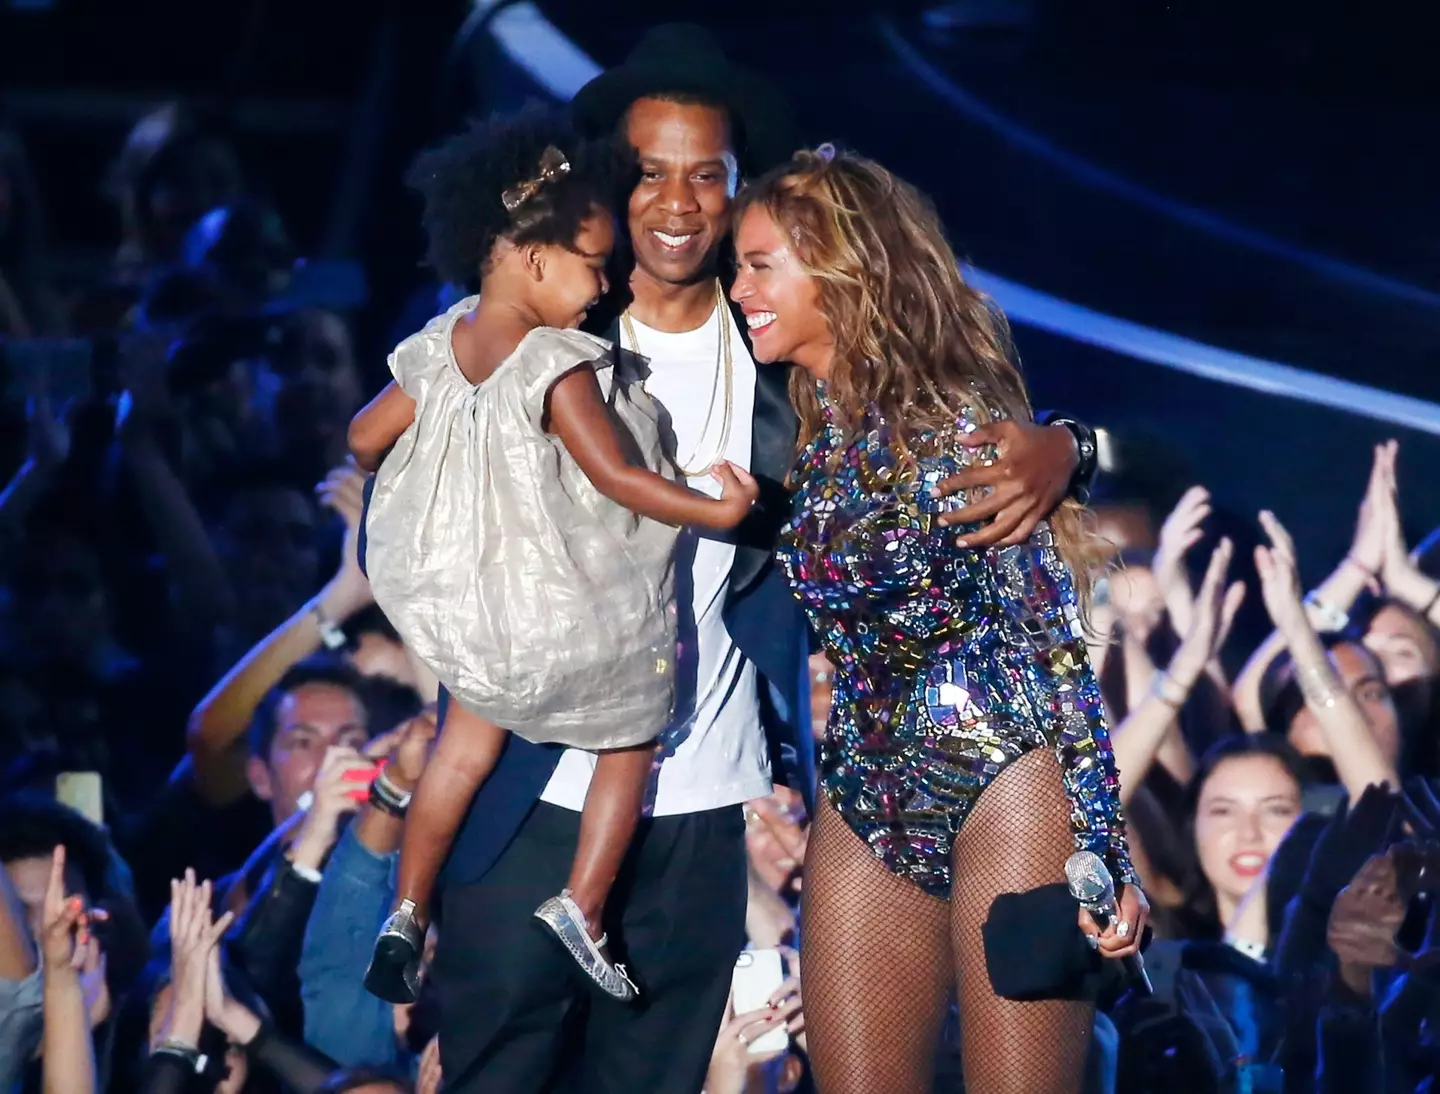 Blue Ivy with her famous parents, Jay-Z and Beyoncé.